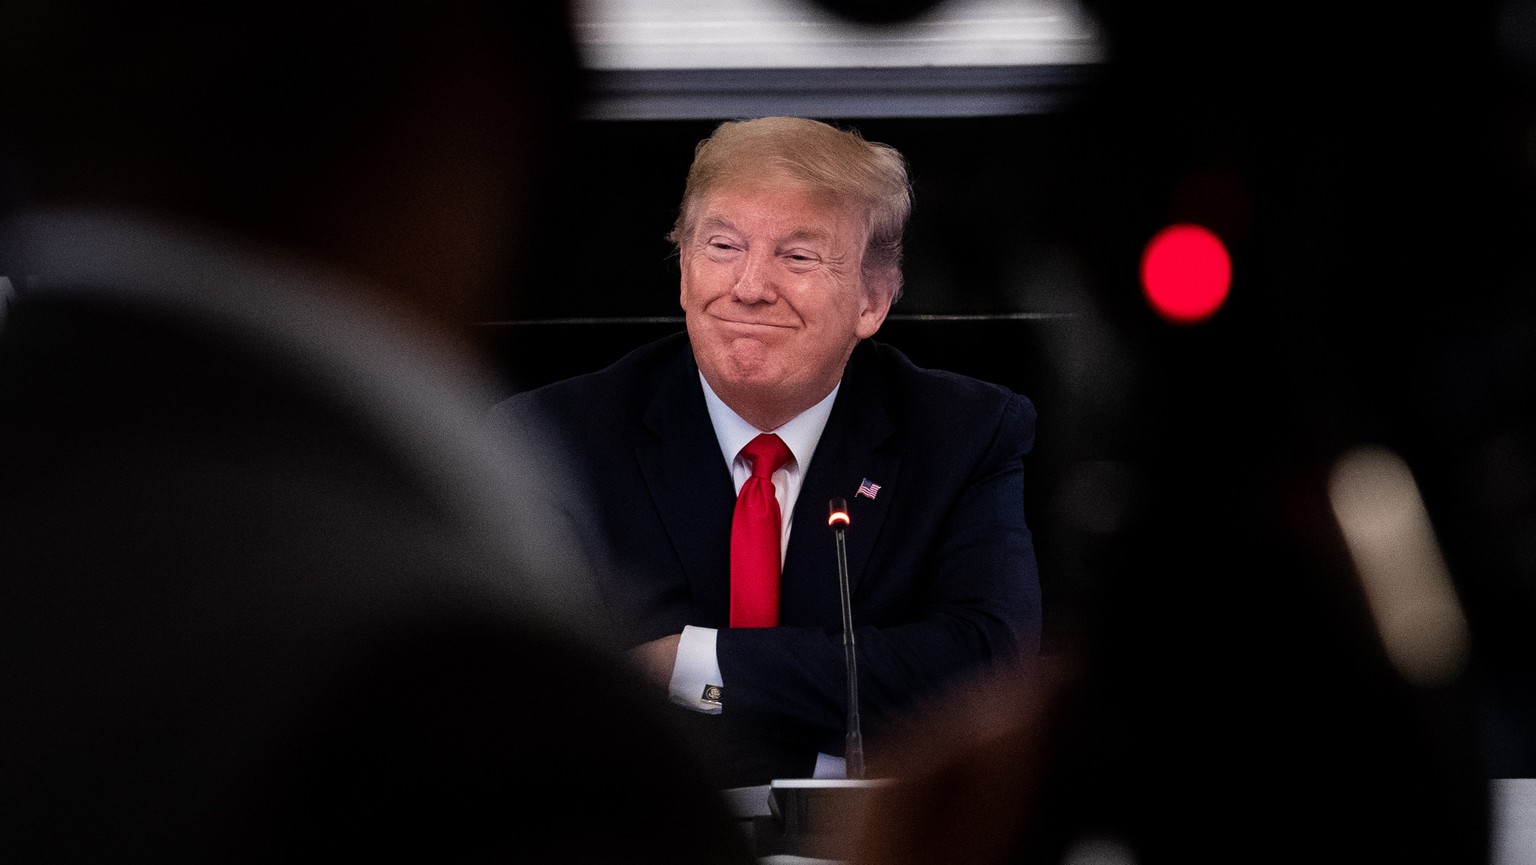 epa08453289 US President Donald Trump speaks during a meeting with industry executives on the reopening of the economy at the White House in Washington, DC., USA, 29 May 2020. President Trump said on  ...